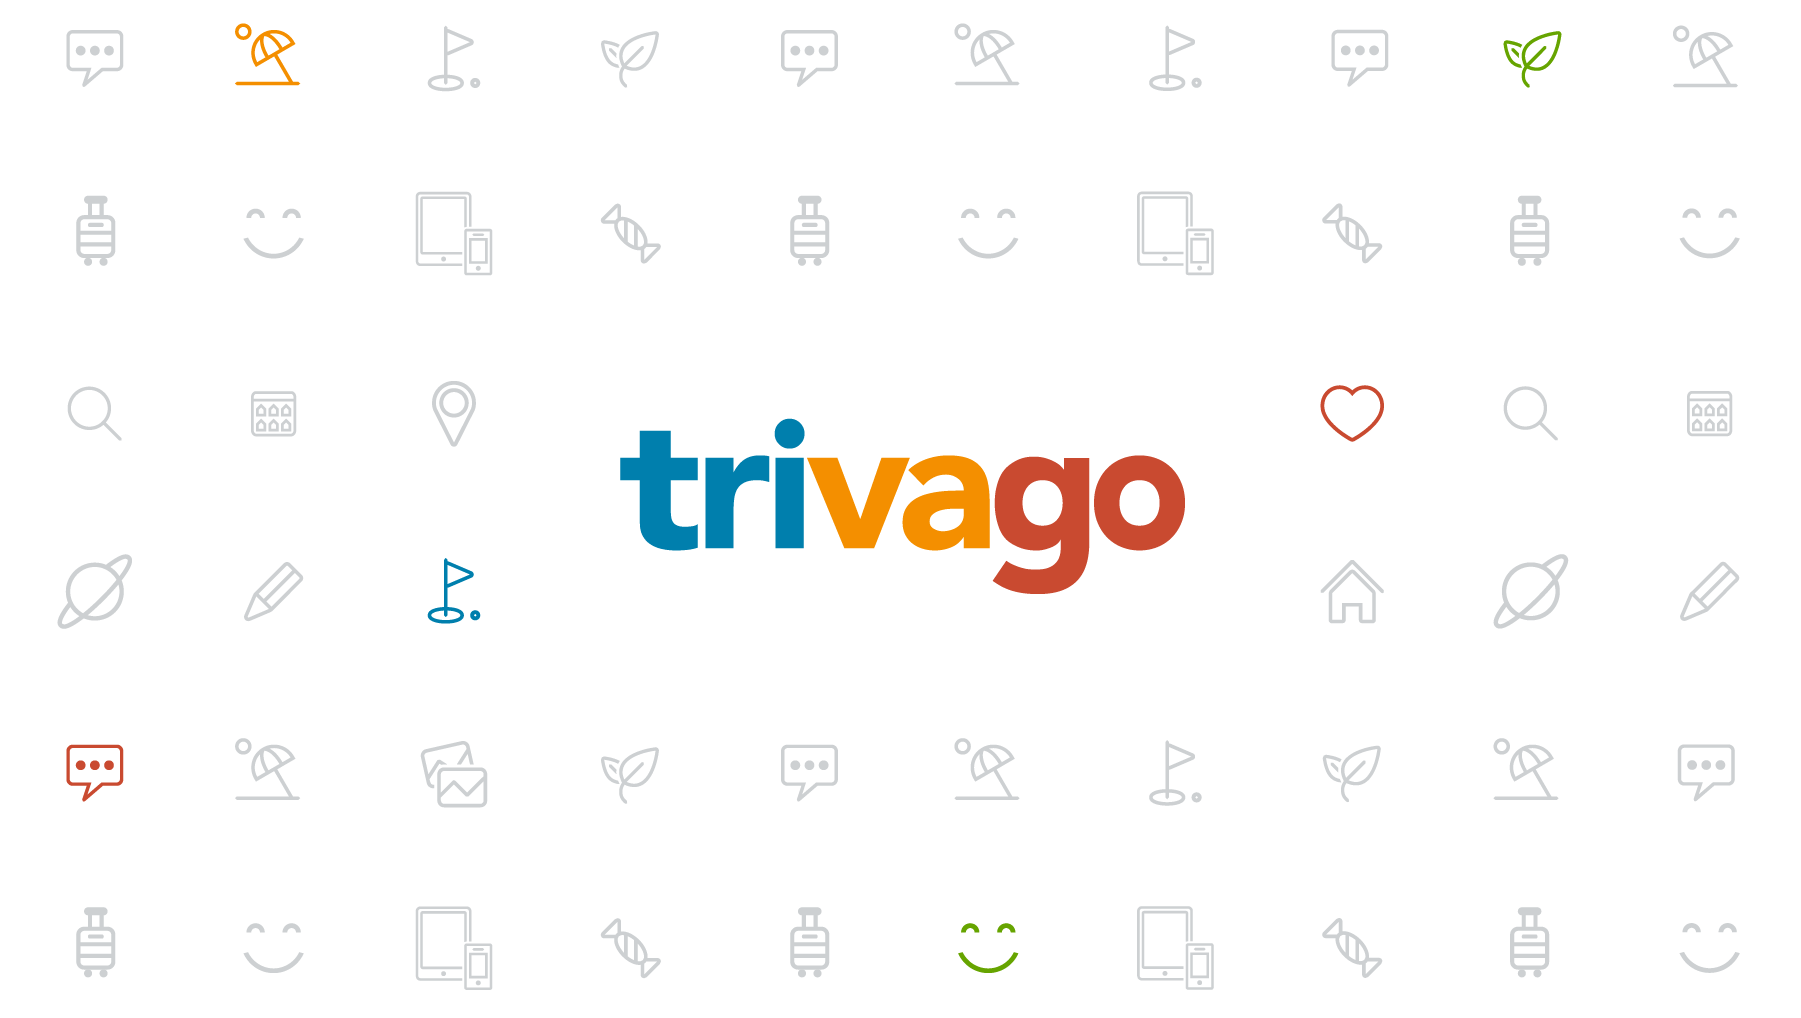 trivago logo for mirai article about their new net cpa on consumption offering